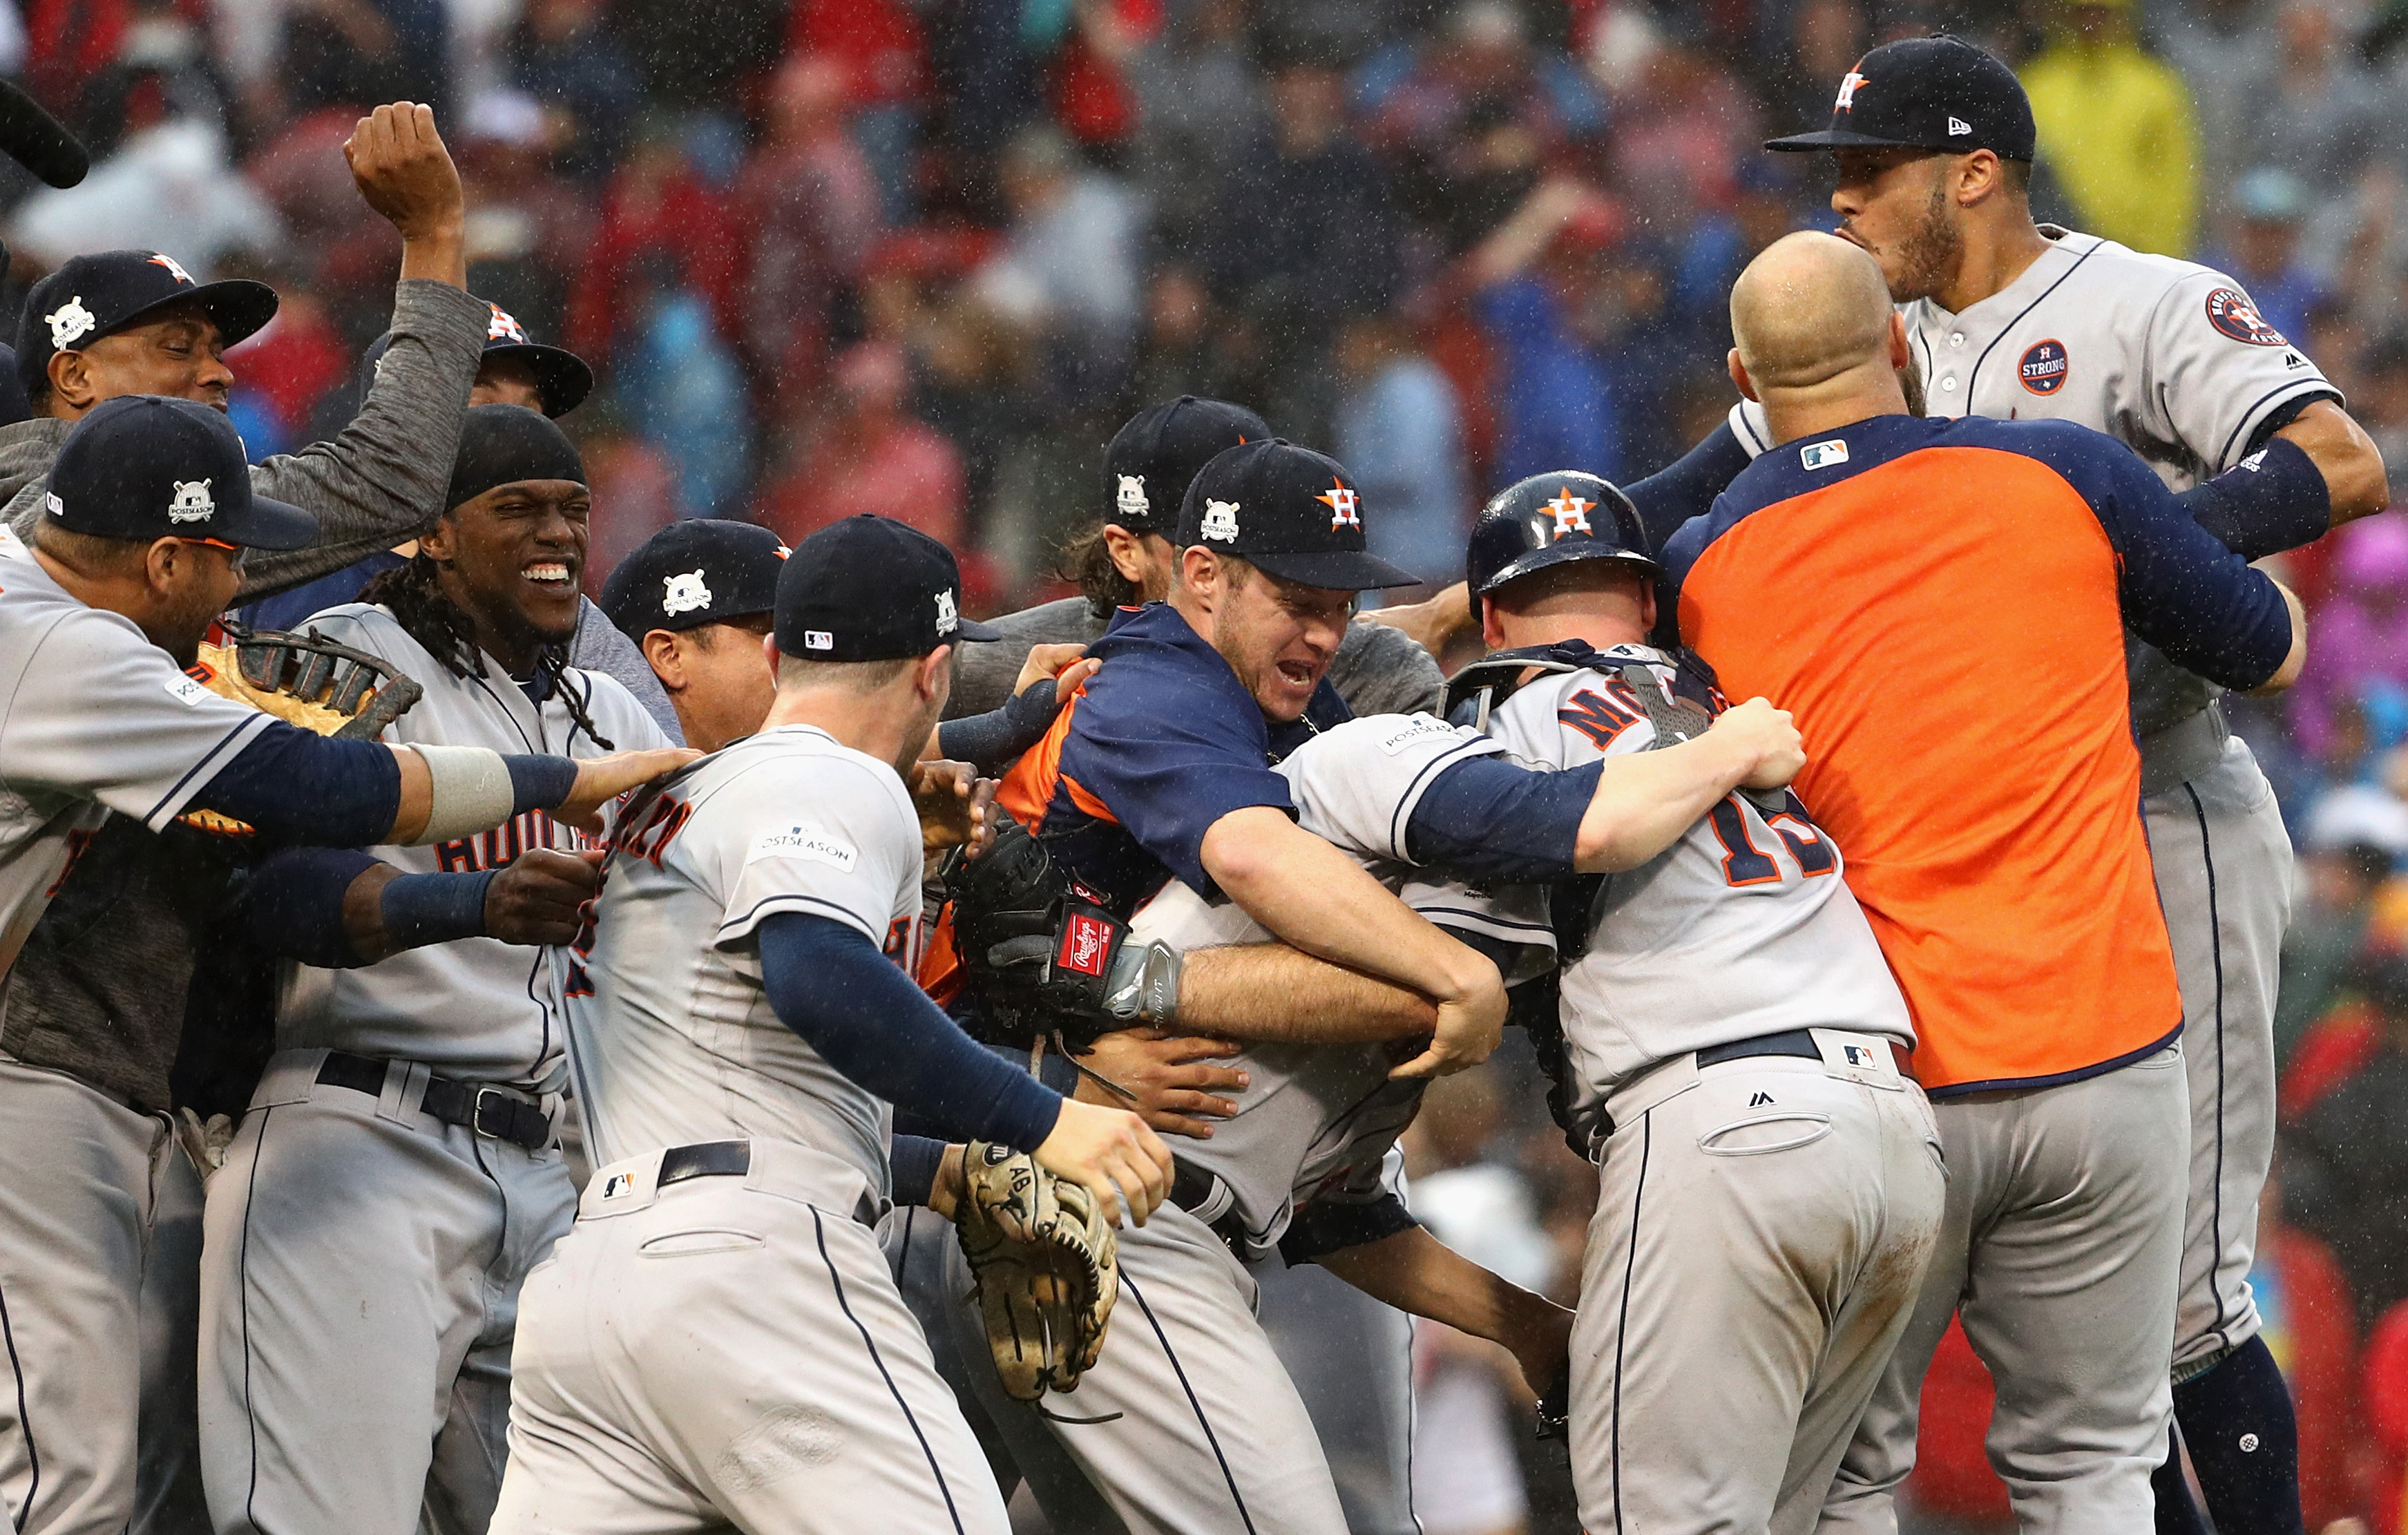 Houston Astros Beat Boston Red Sox to Reach World Series - The New York  Times